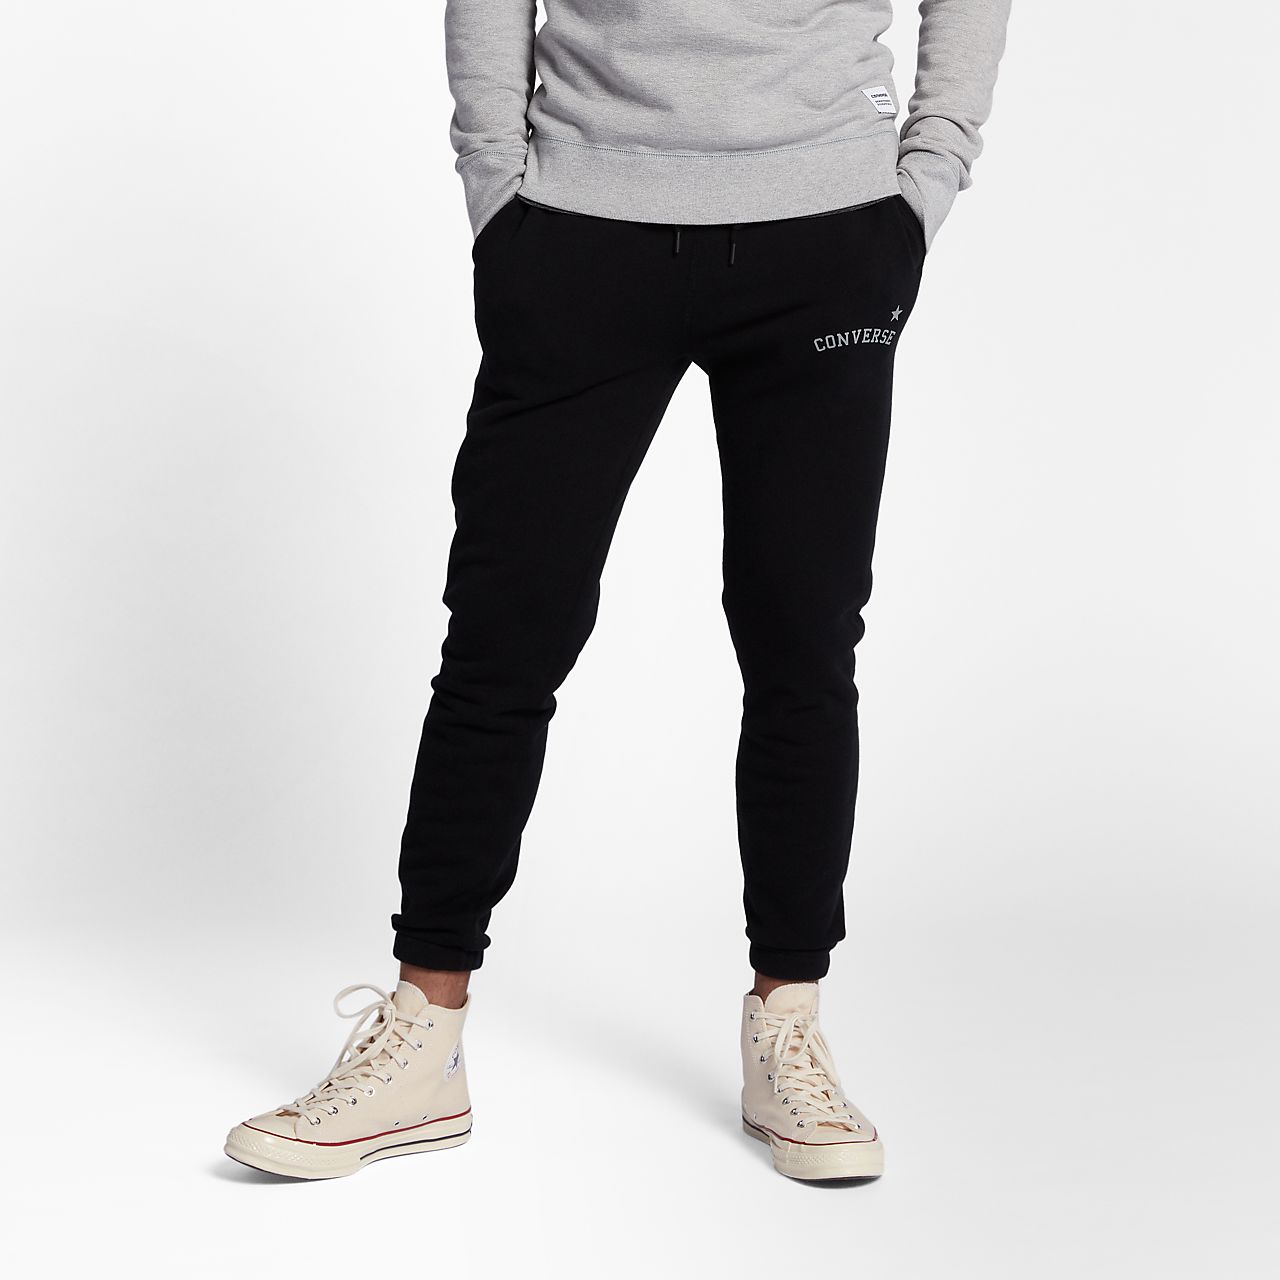 joggers with converse Online Shopping 